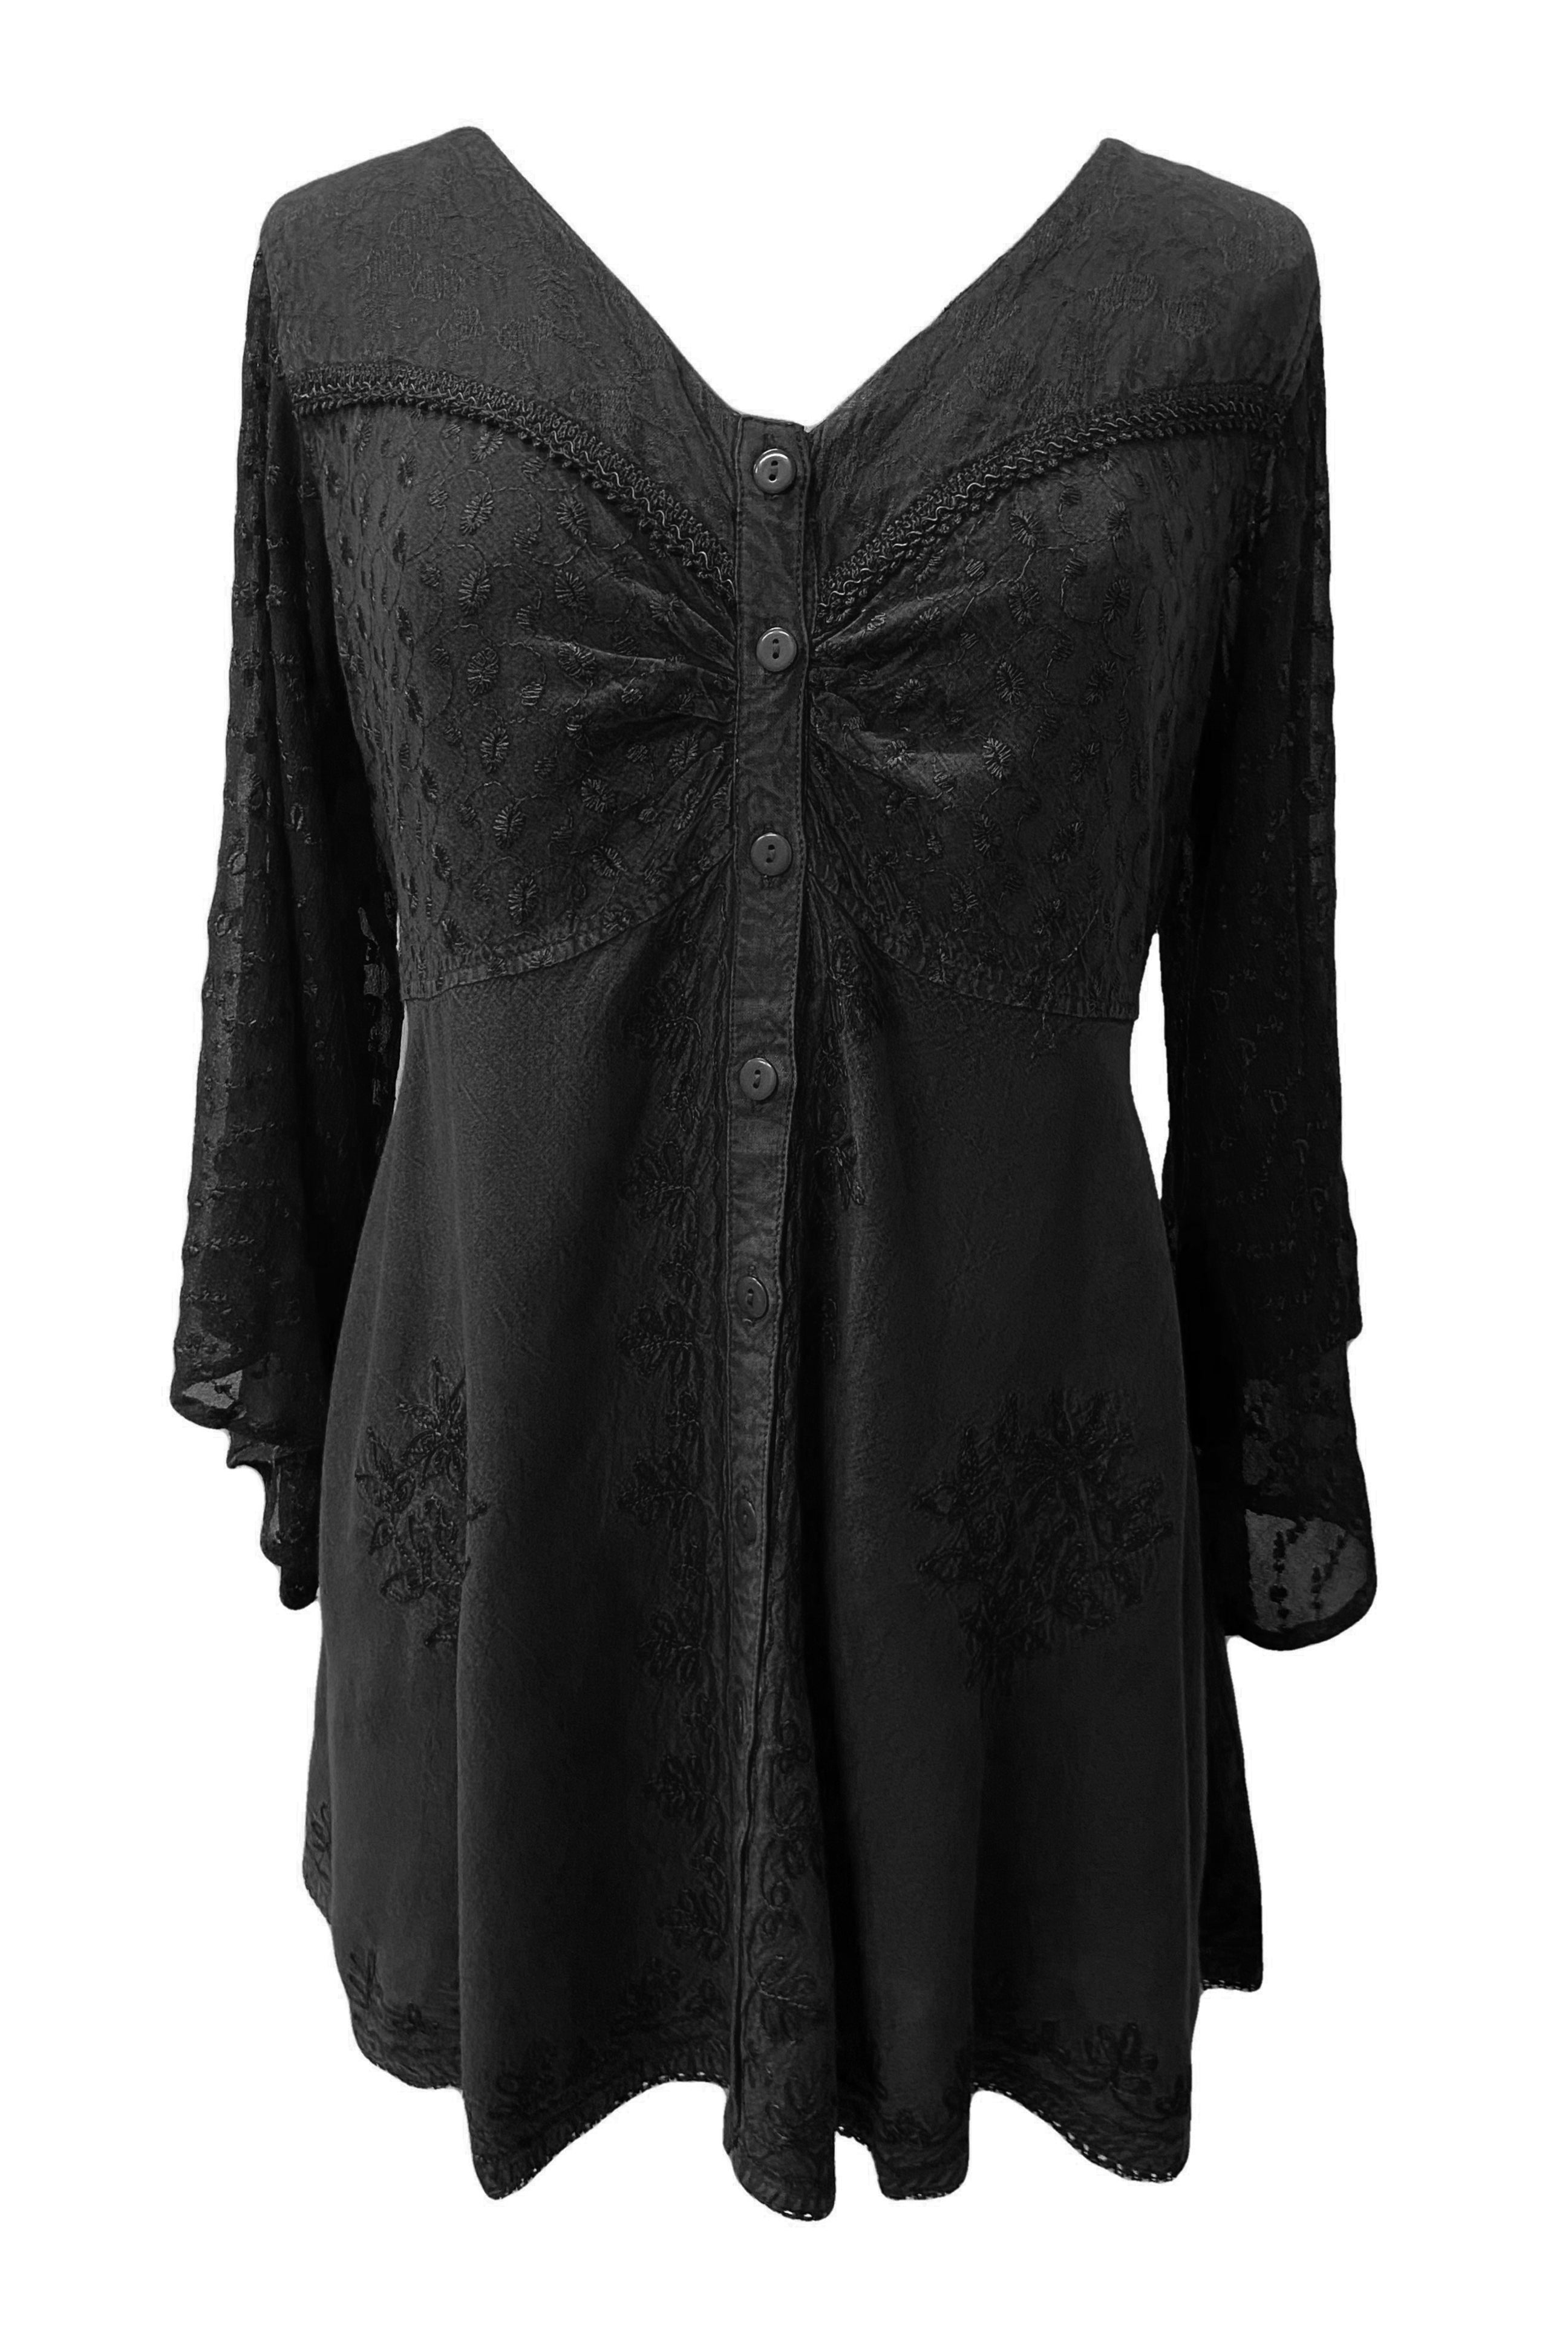 18 607 B Medieval Gothic Embroidered Button Down Sheer Lace Sleeve Top ...